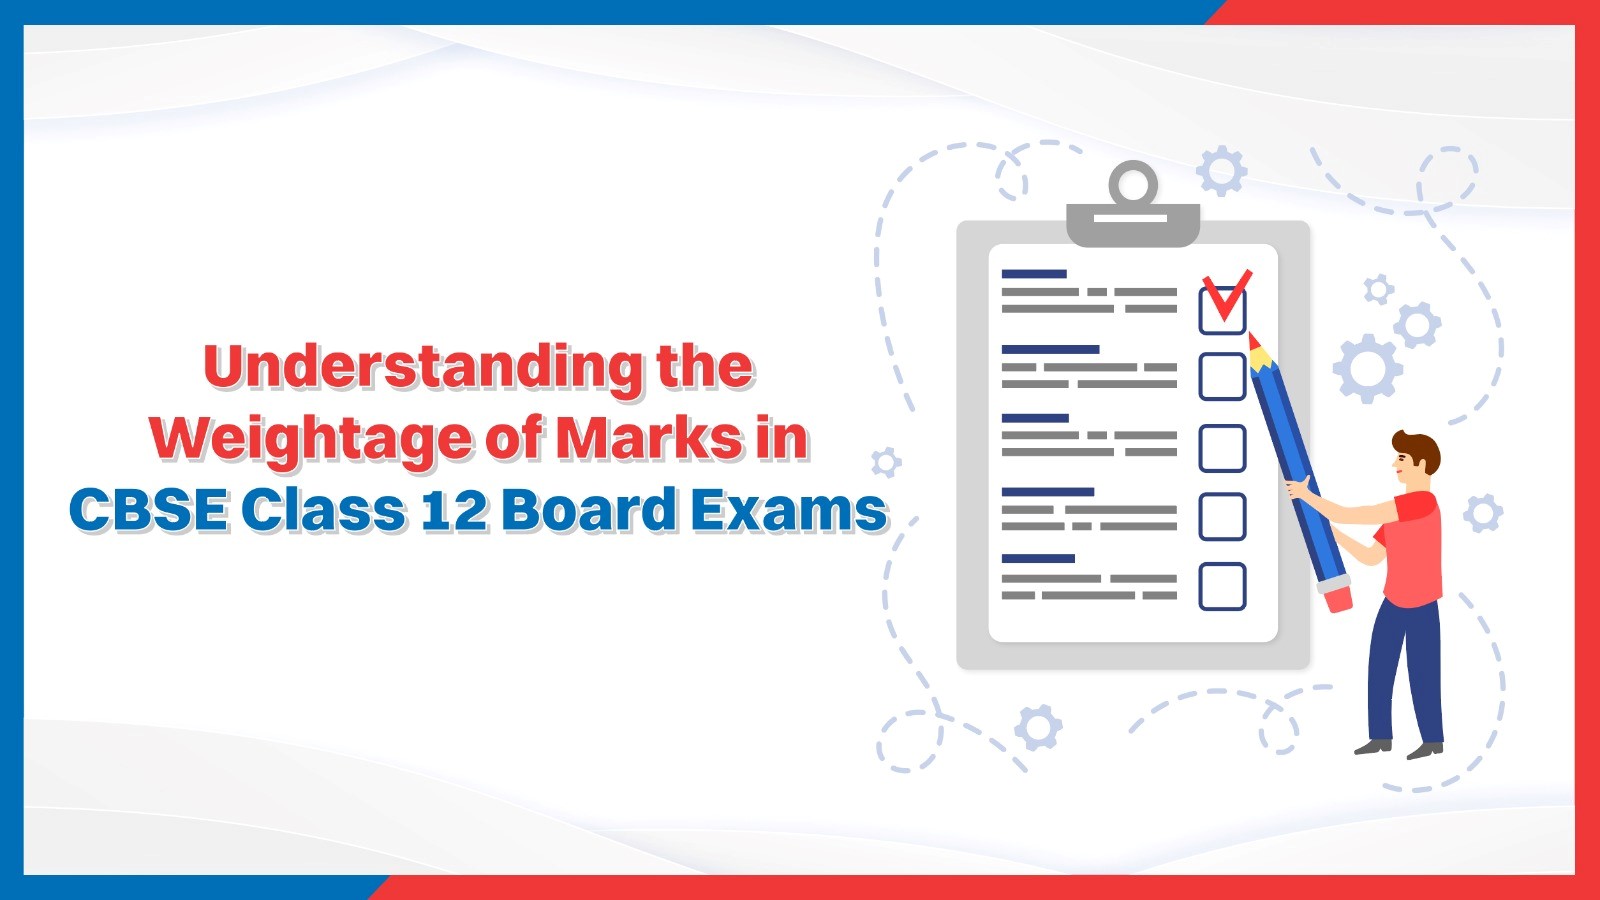 Understanding the Weightage of Marks in CBSE Class 12 Board Exams.jpg